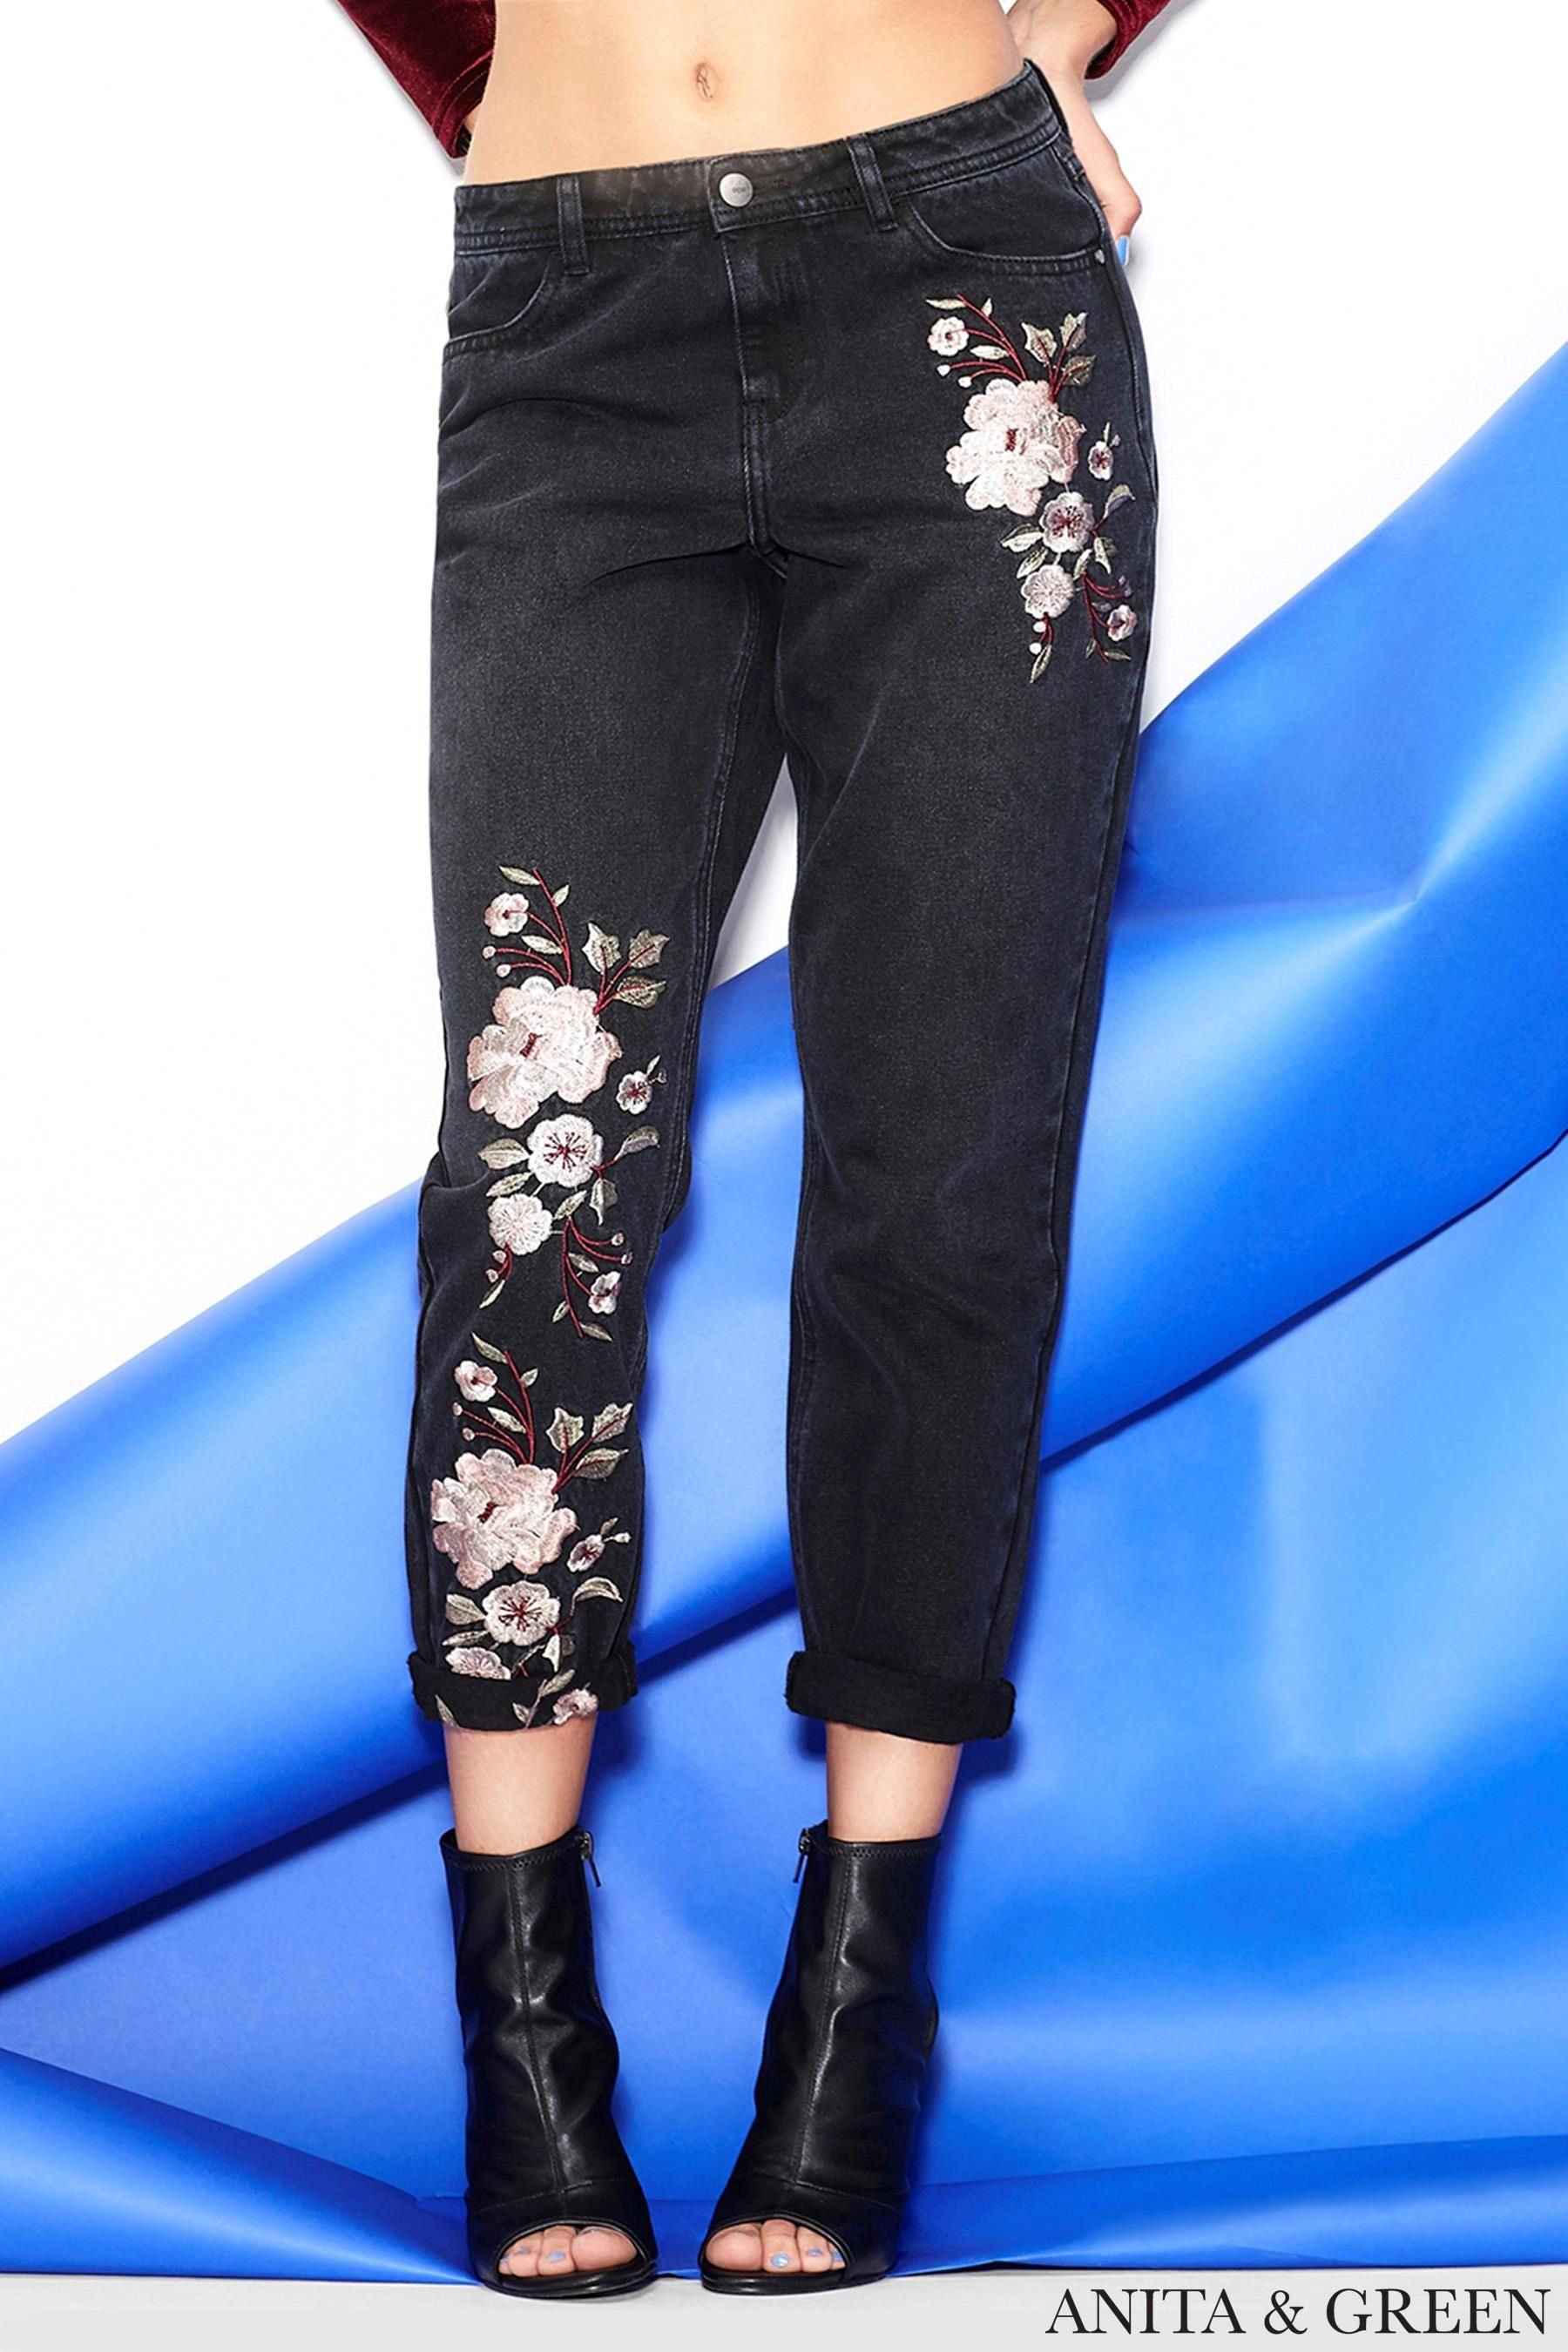 Anita & Green Floral Embroidered Jeans